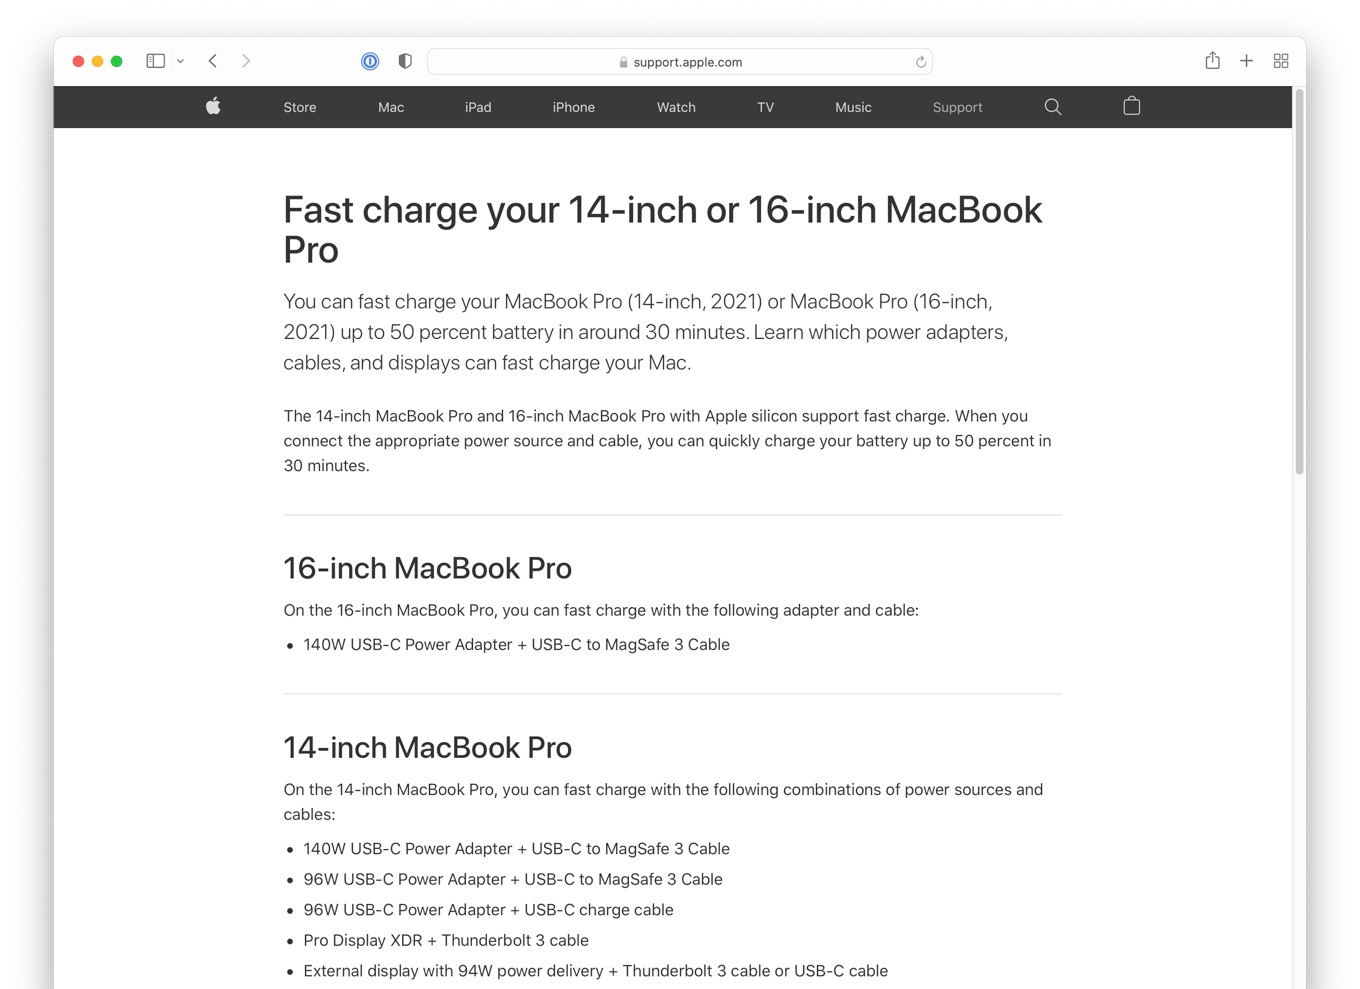 Fast charge your 14-inch or 16-inch MacBook Pro